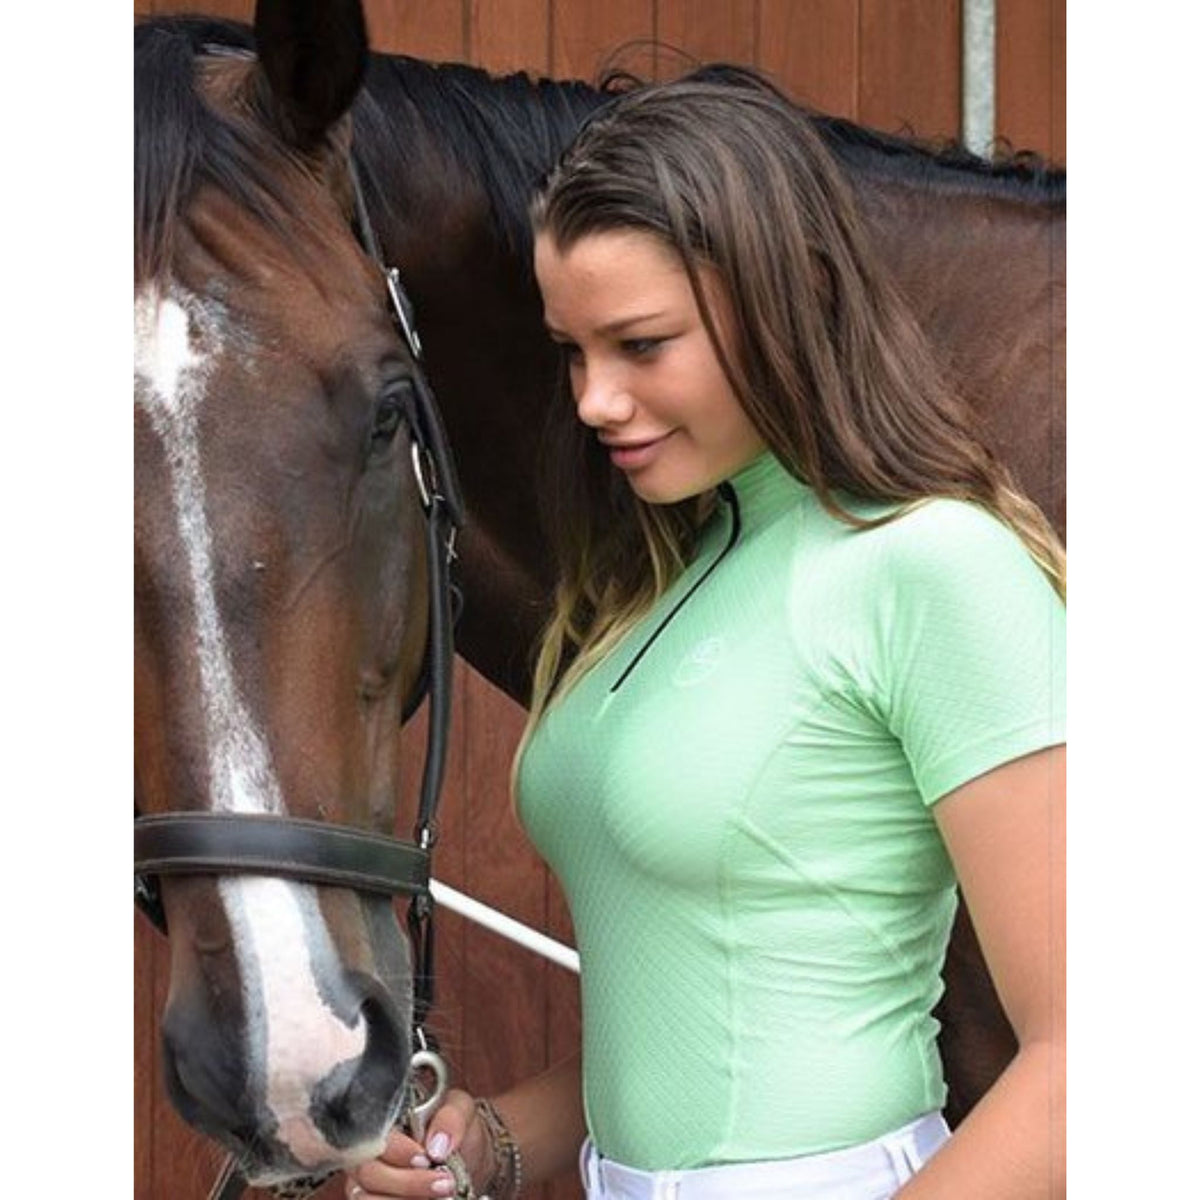 Lady holding bay horse, wearing short sleeve mint shirt with quarter zip.